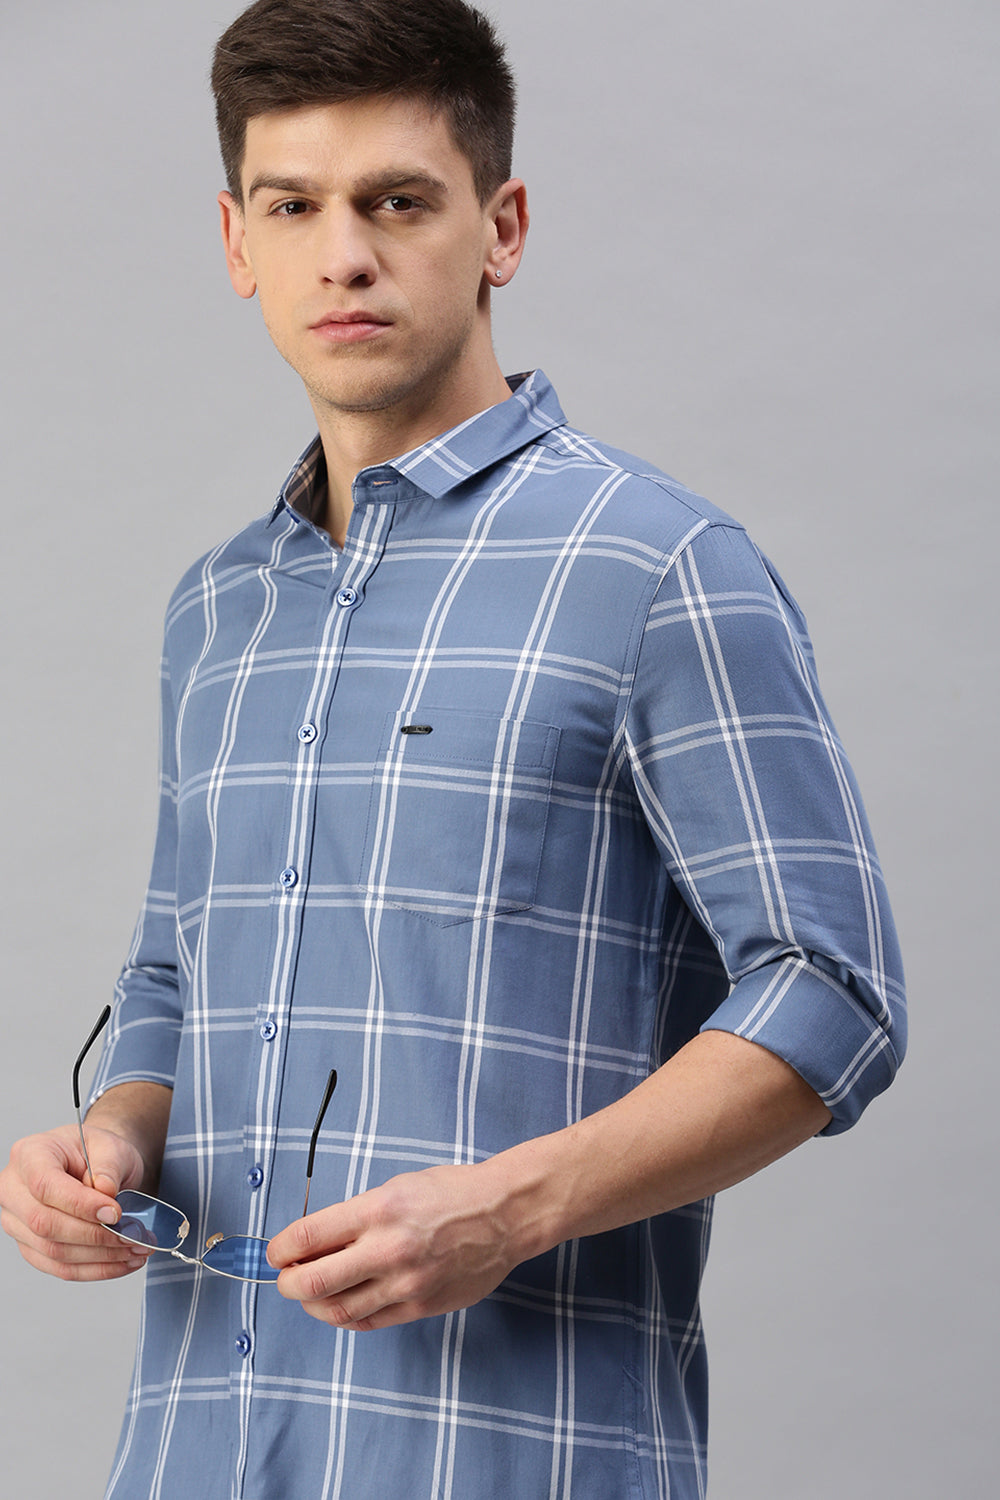 Classic Polo Men's Cotton Full Sleeve Checked Slim Fit Polo Neck Blue Color Woven Shirt | So1-122 A